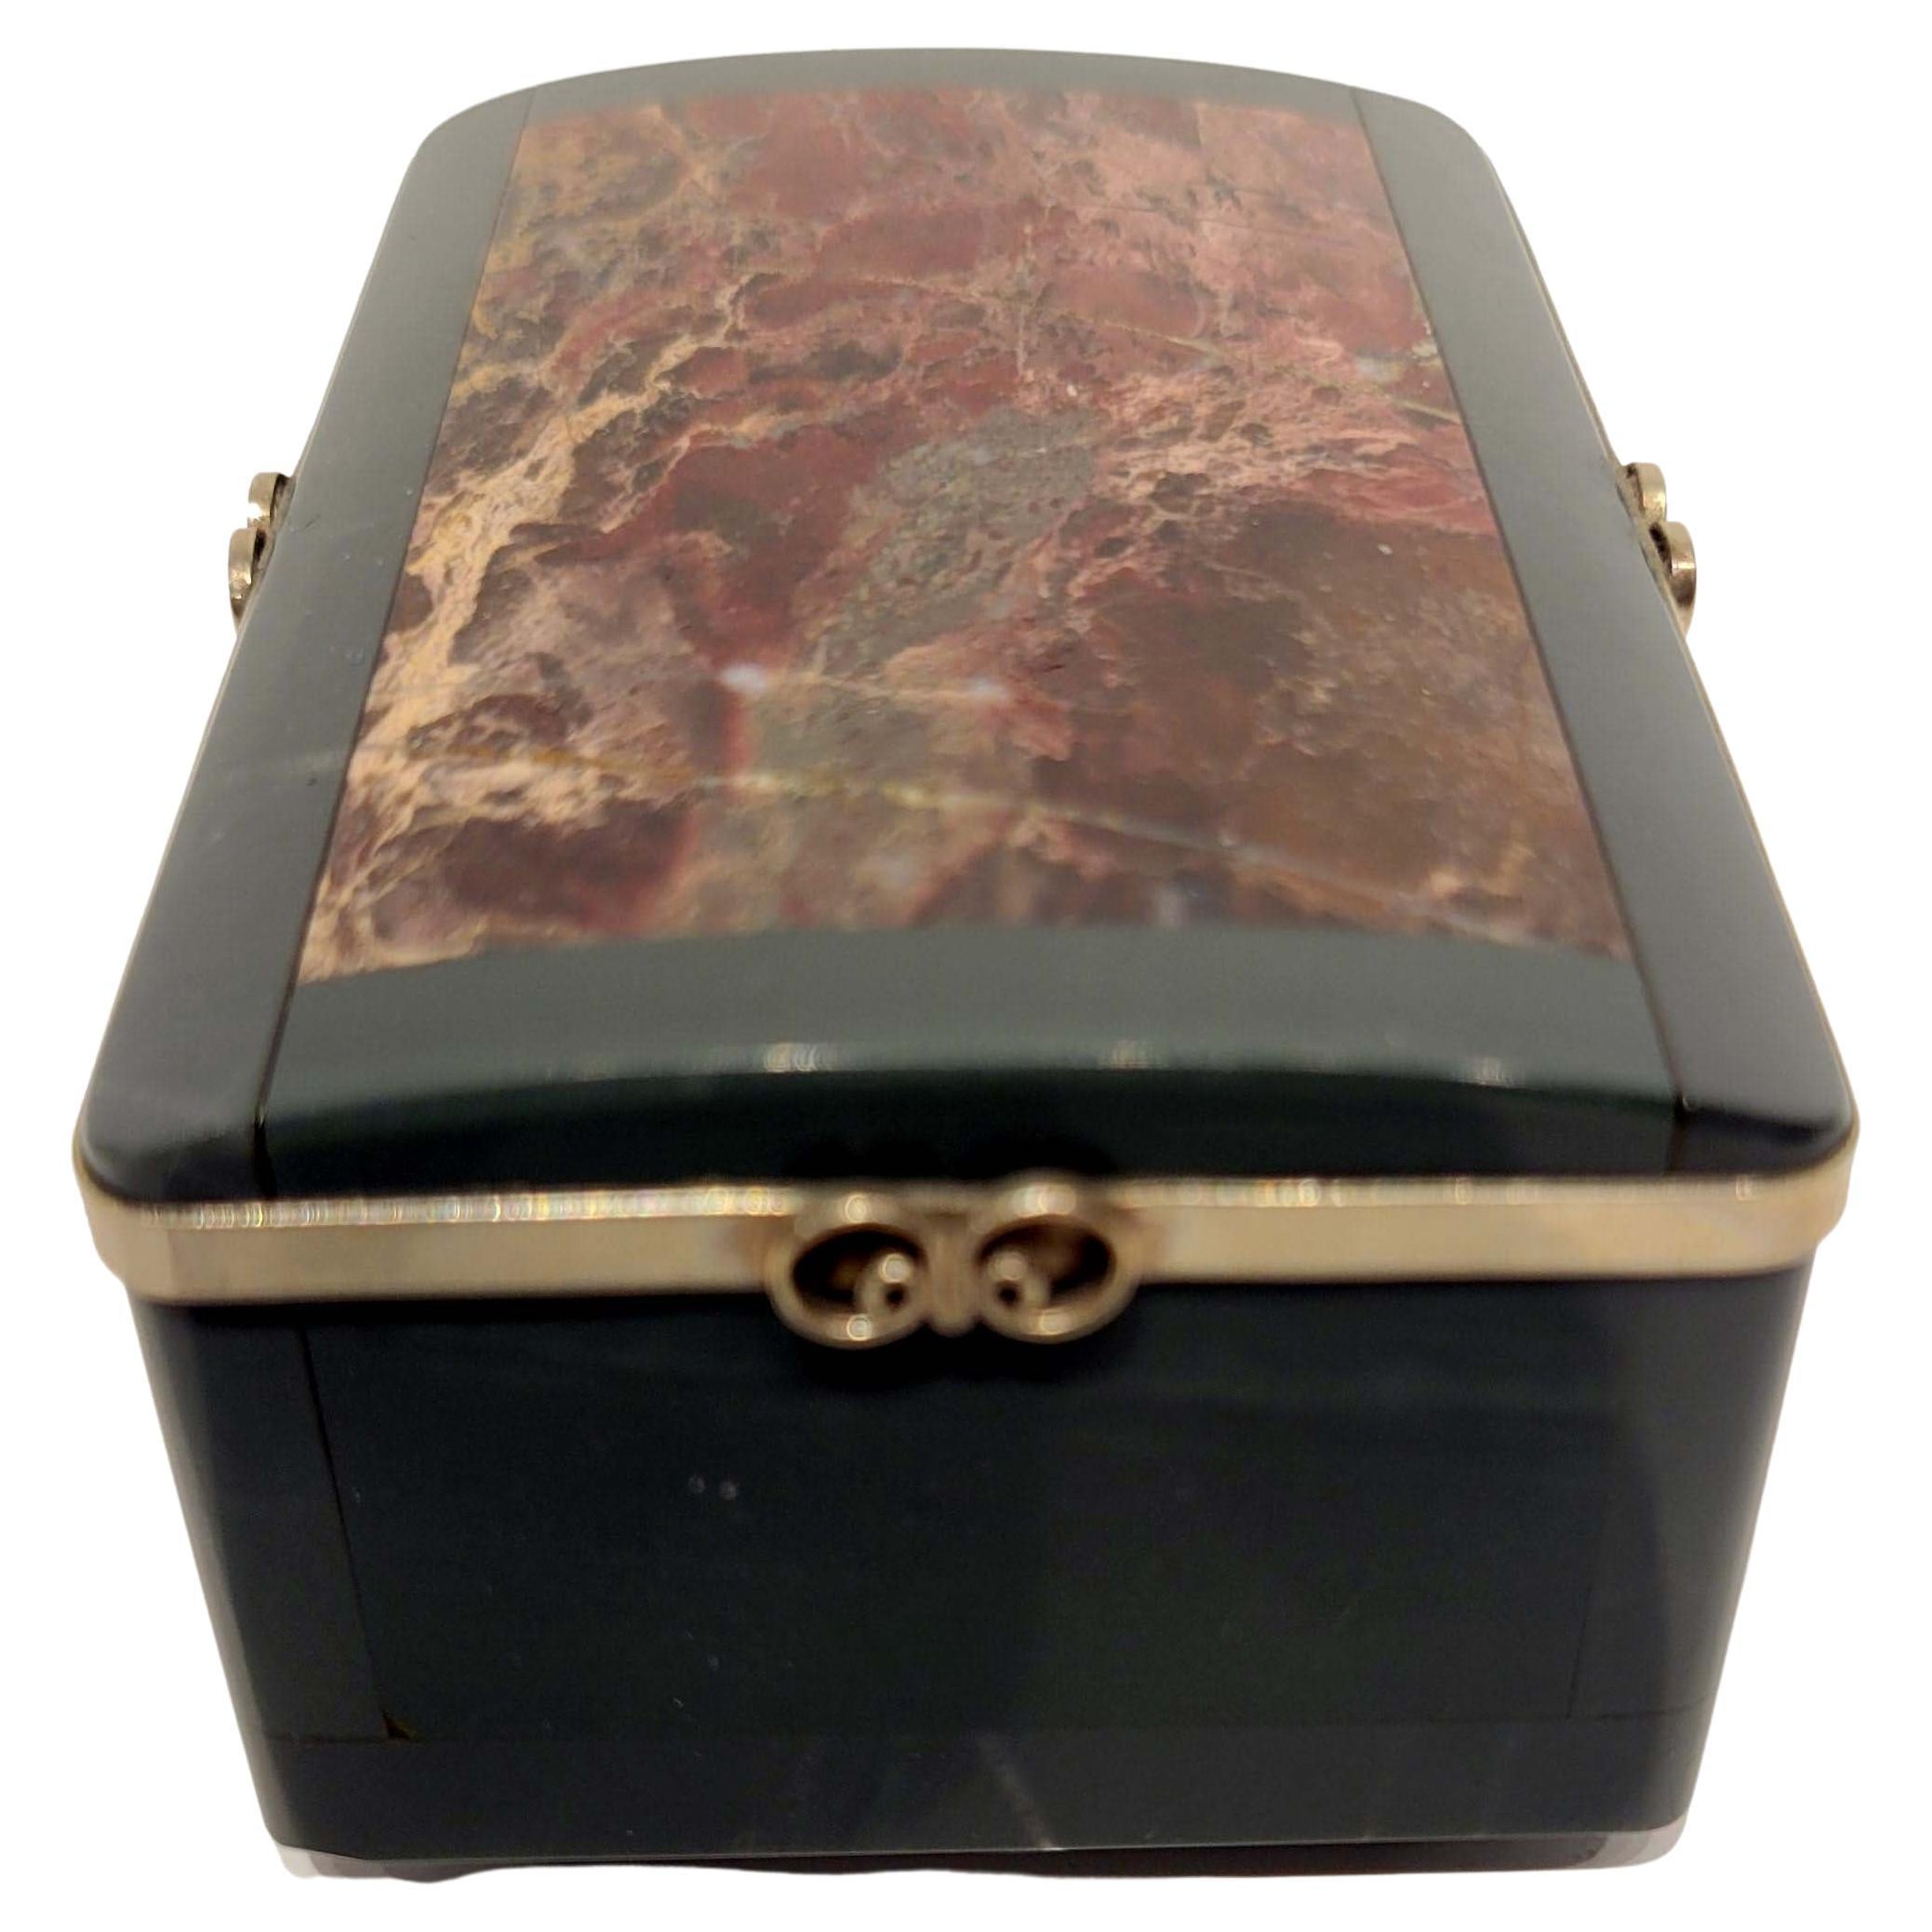 A magnificent Kalkan marble specimen box mounted with sterling silver.
In great condition with a russian illegible mark underneath.